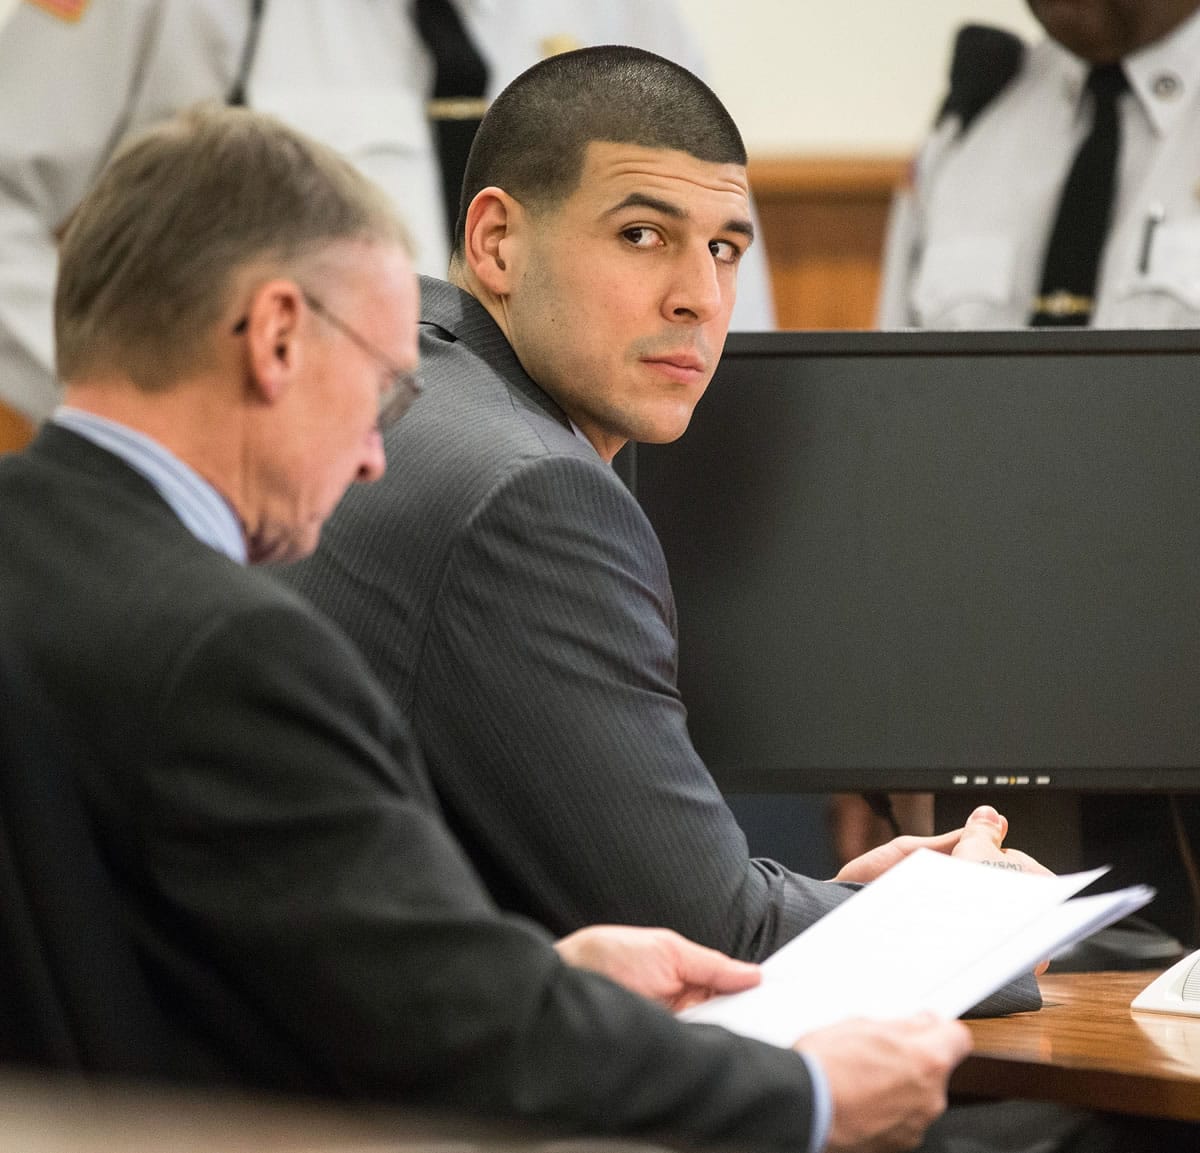 Former New England Patriots player Aaron Hernandez, right, glances towards the Lloyd family during his trial at Bristol County Superior Court in Fall River, Mass., on Tuesday.